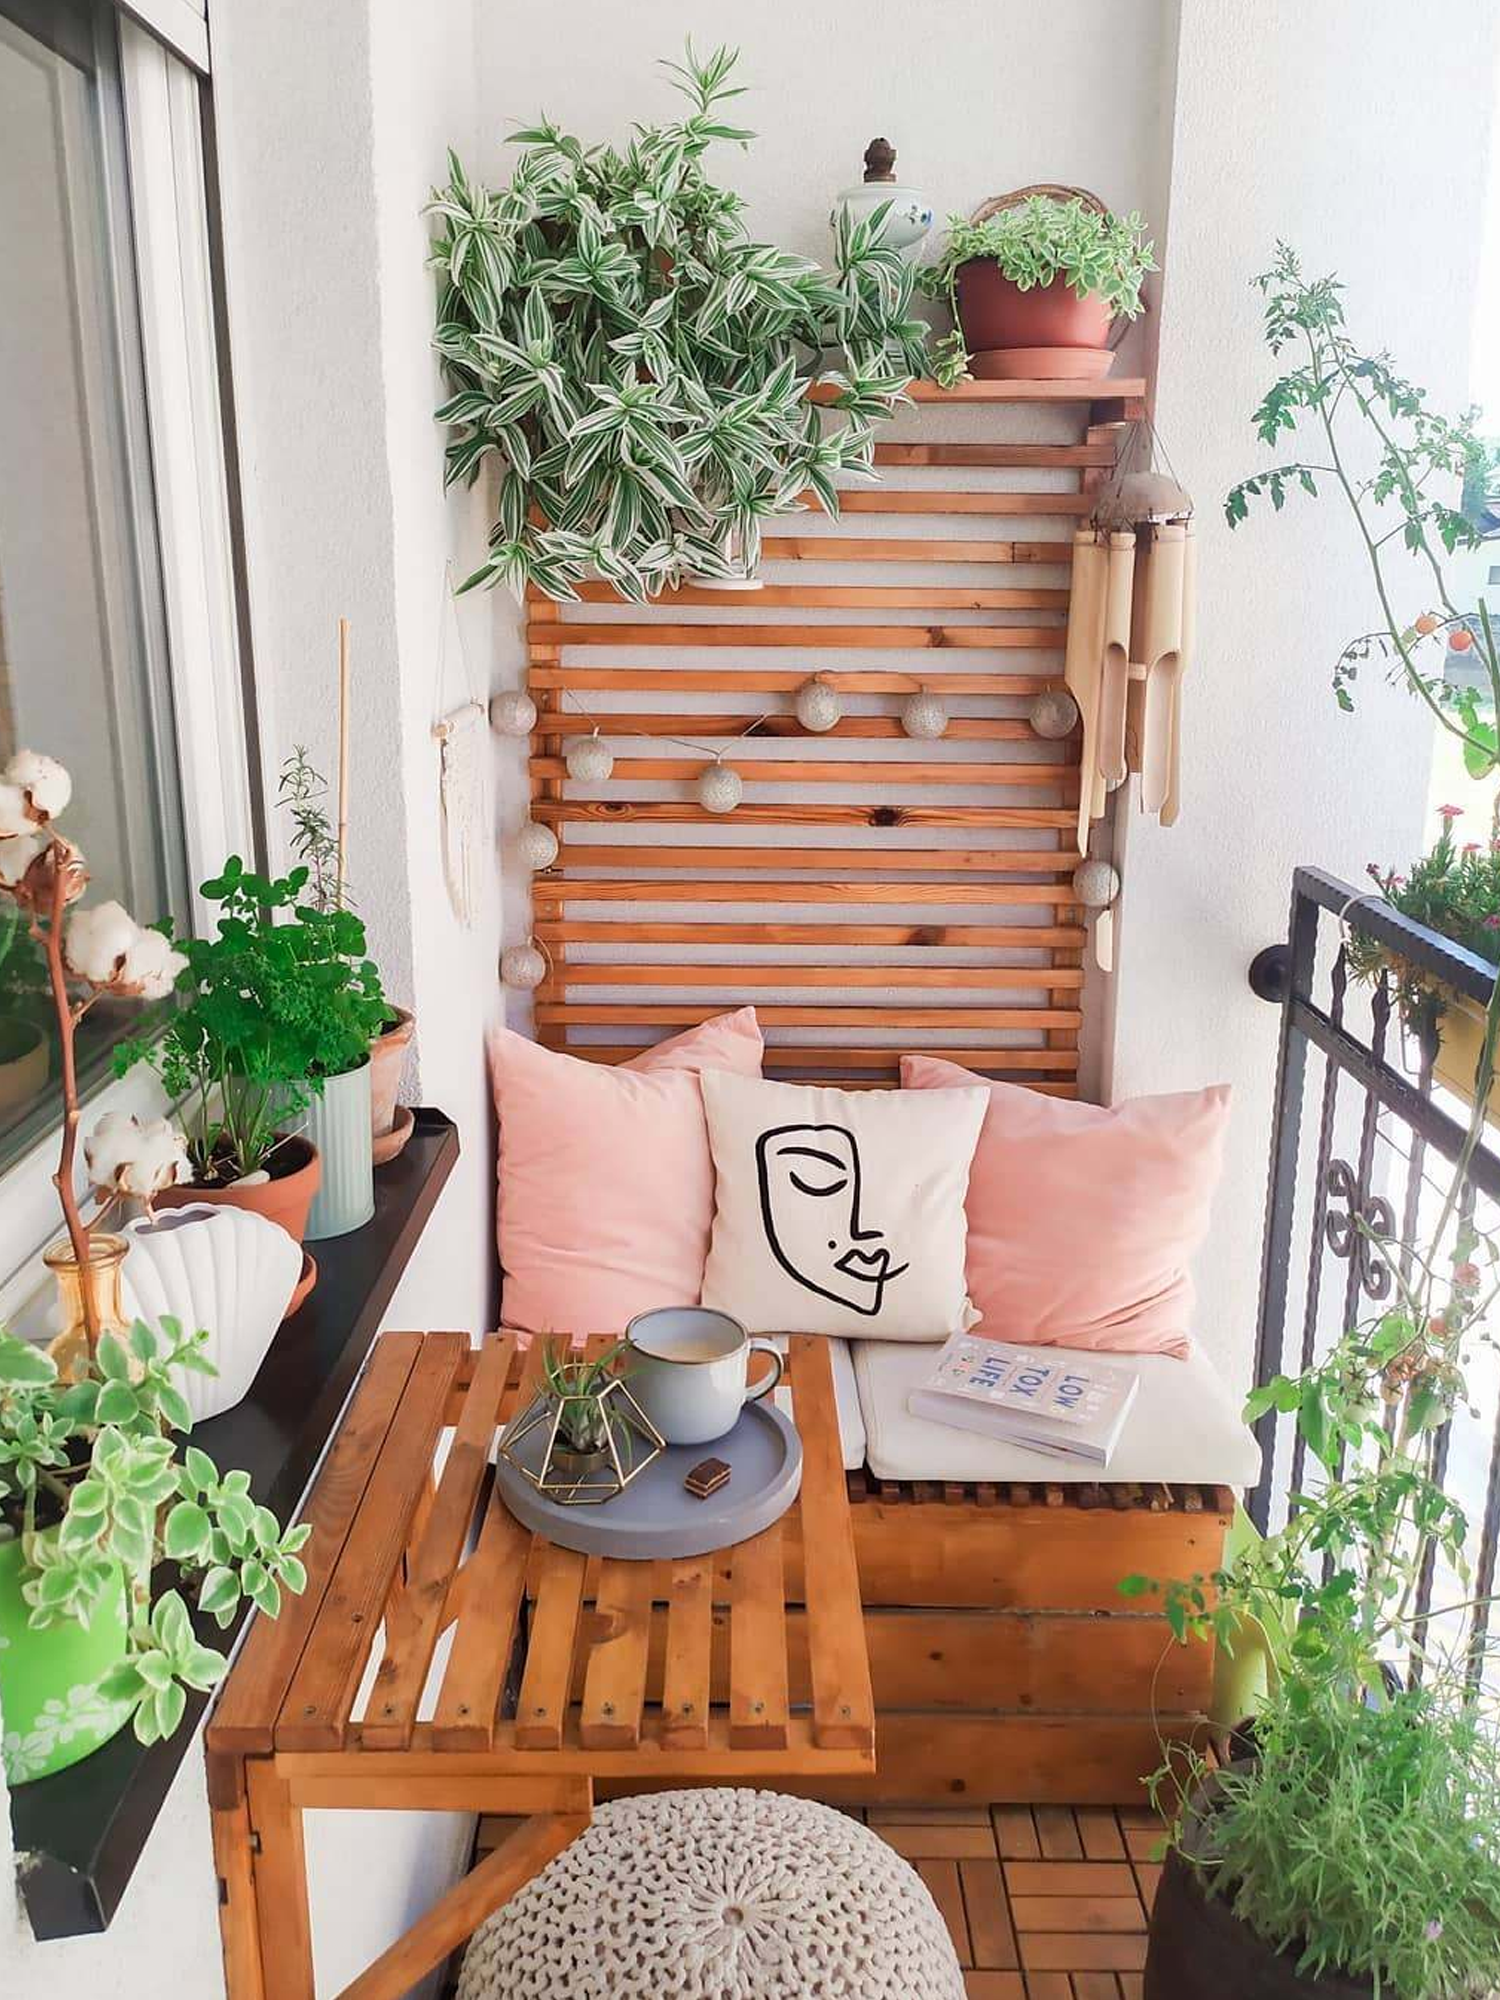 Small Space, Big Style Easy DIY balcony decor ideas for every style